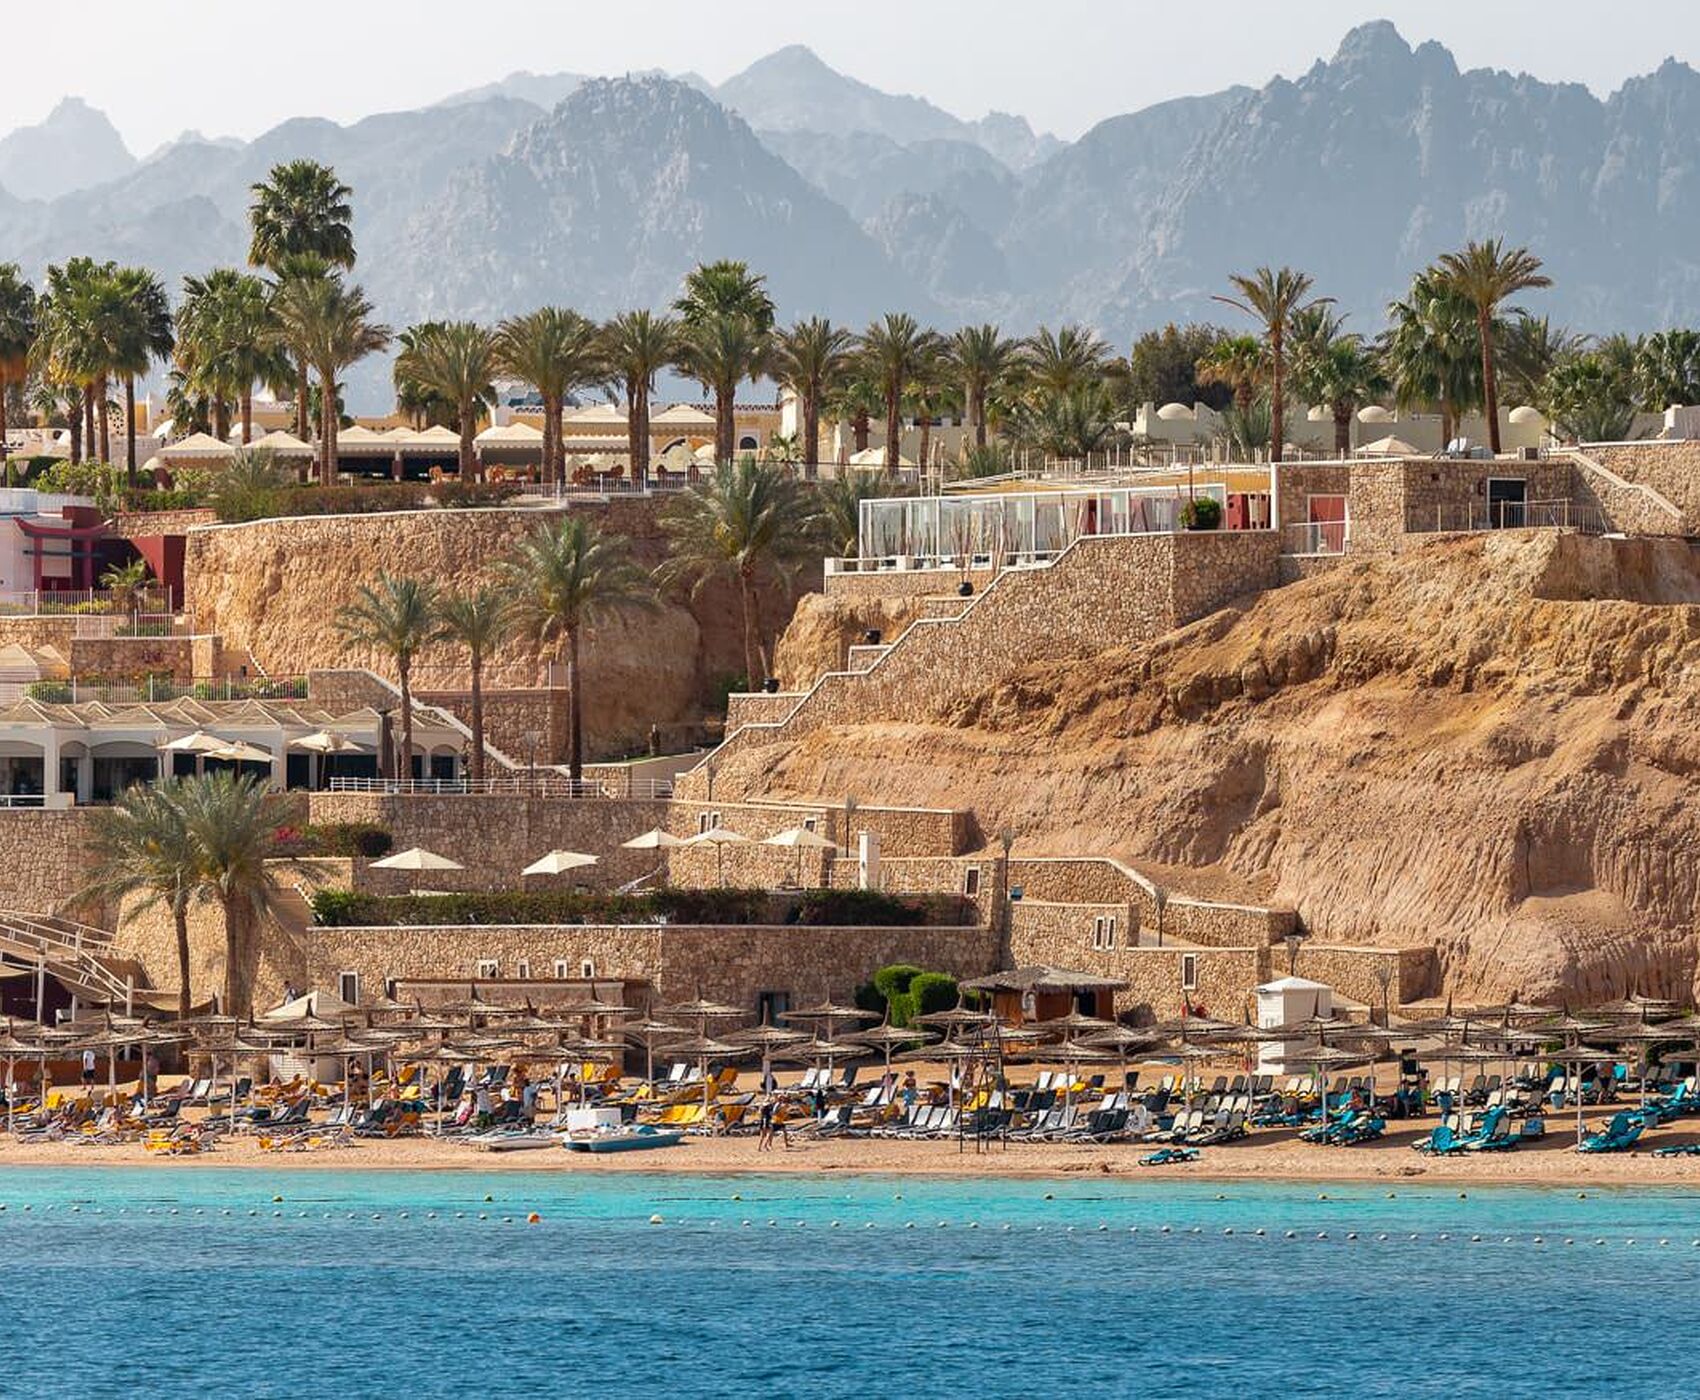 SHARM EL SHEIKH HOLIDAY PACKAGE WITH  DIRECT FLIGHT FROM ANTALYA 